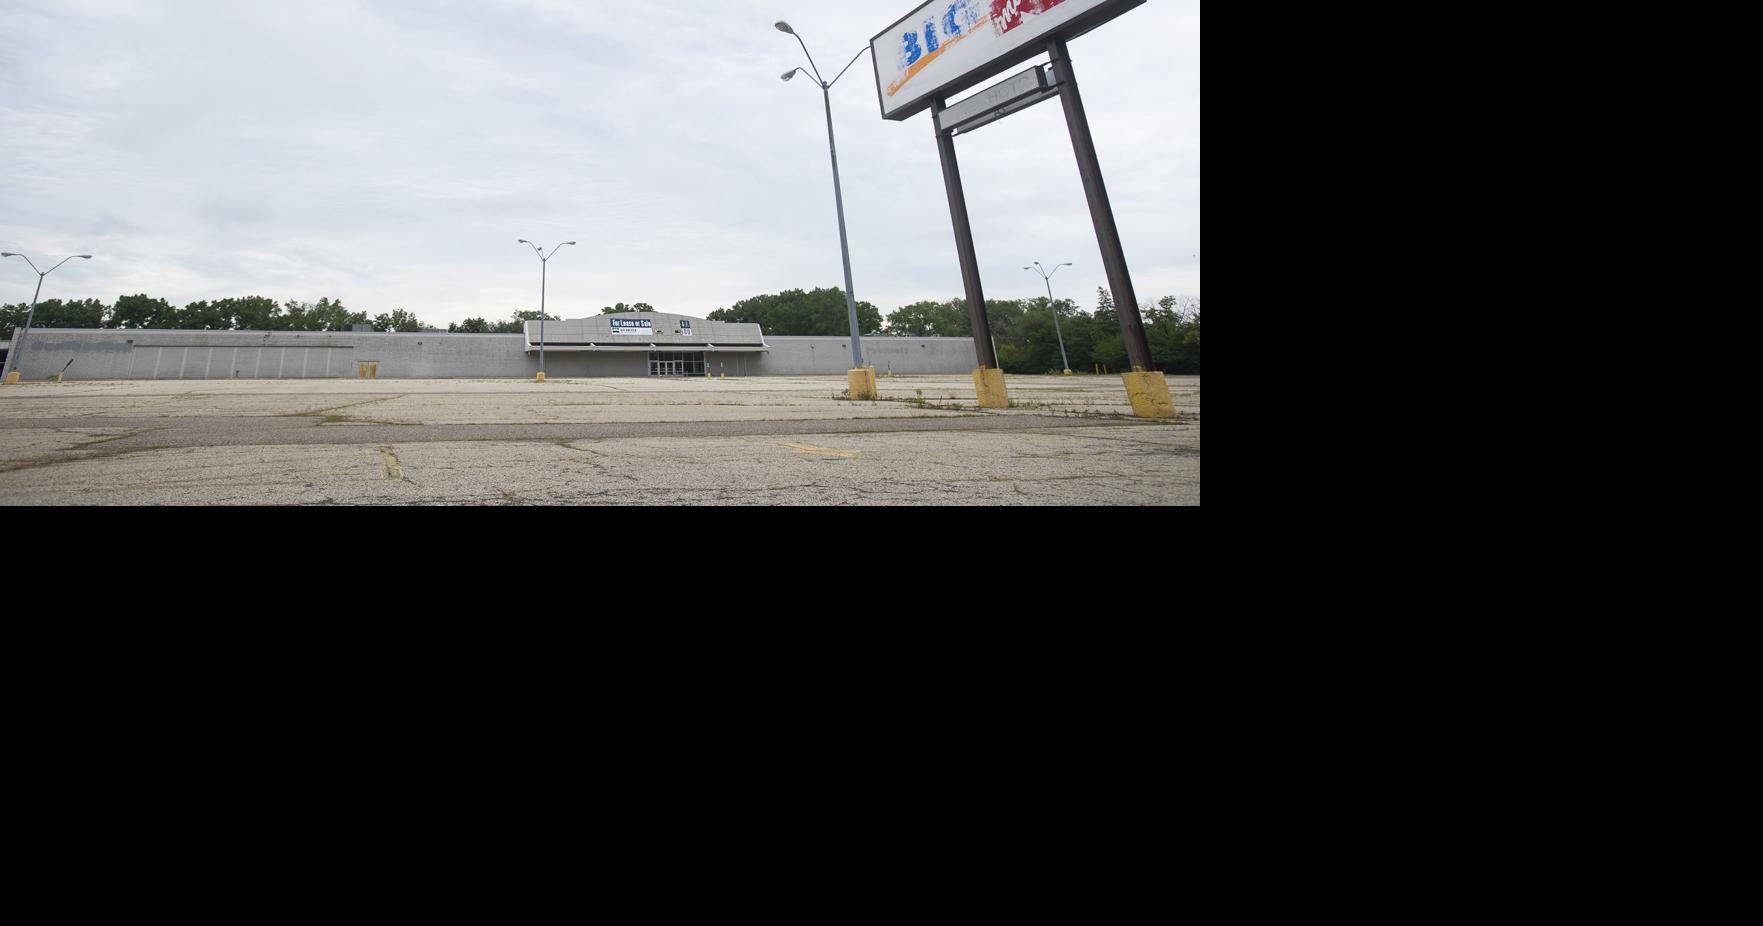 UPDATE: Developer applying for permit to add two restaurants in front of  Kmart building, Top Story